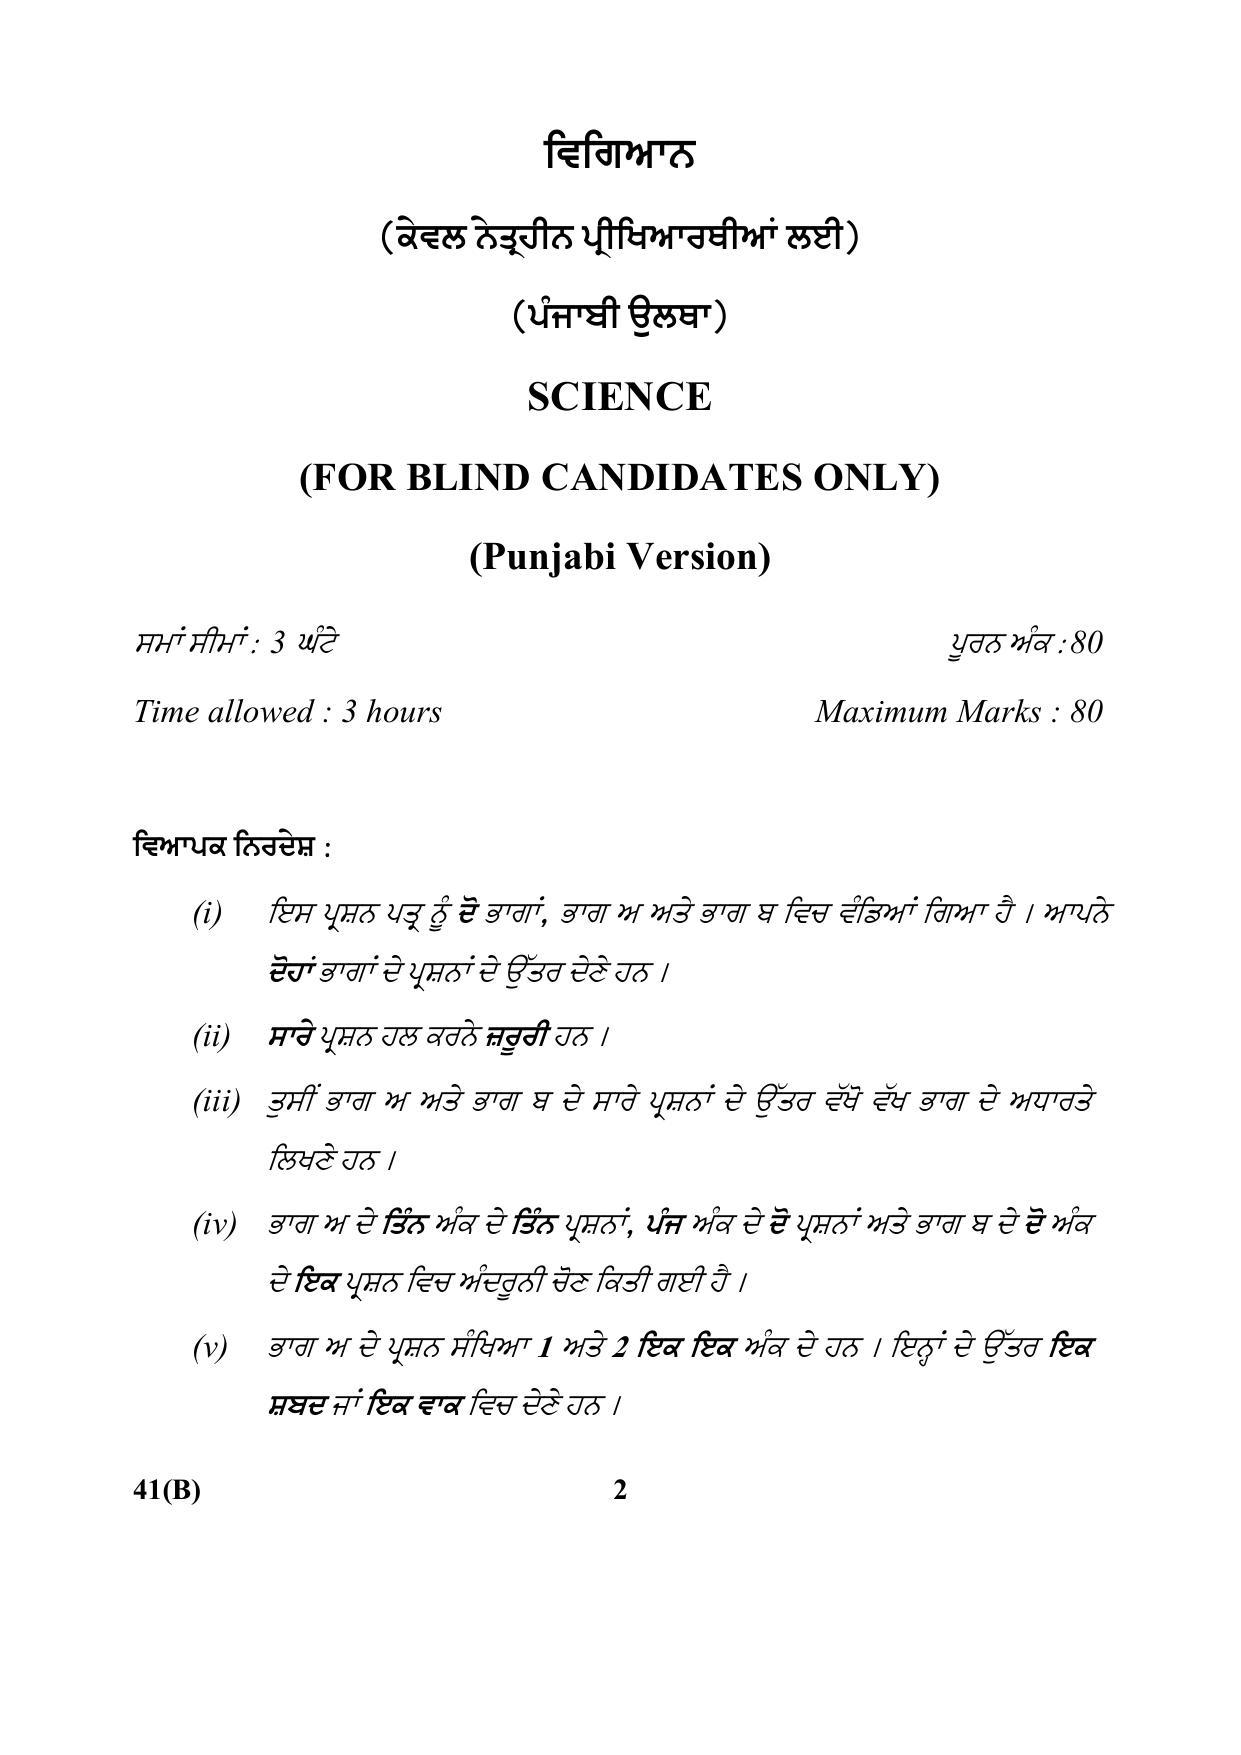 CBSE Class 10 41(B) (Science) For Blind_Punjabi 2018 Question Paper - Page 2